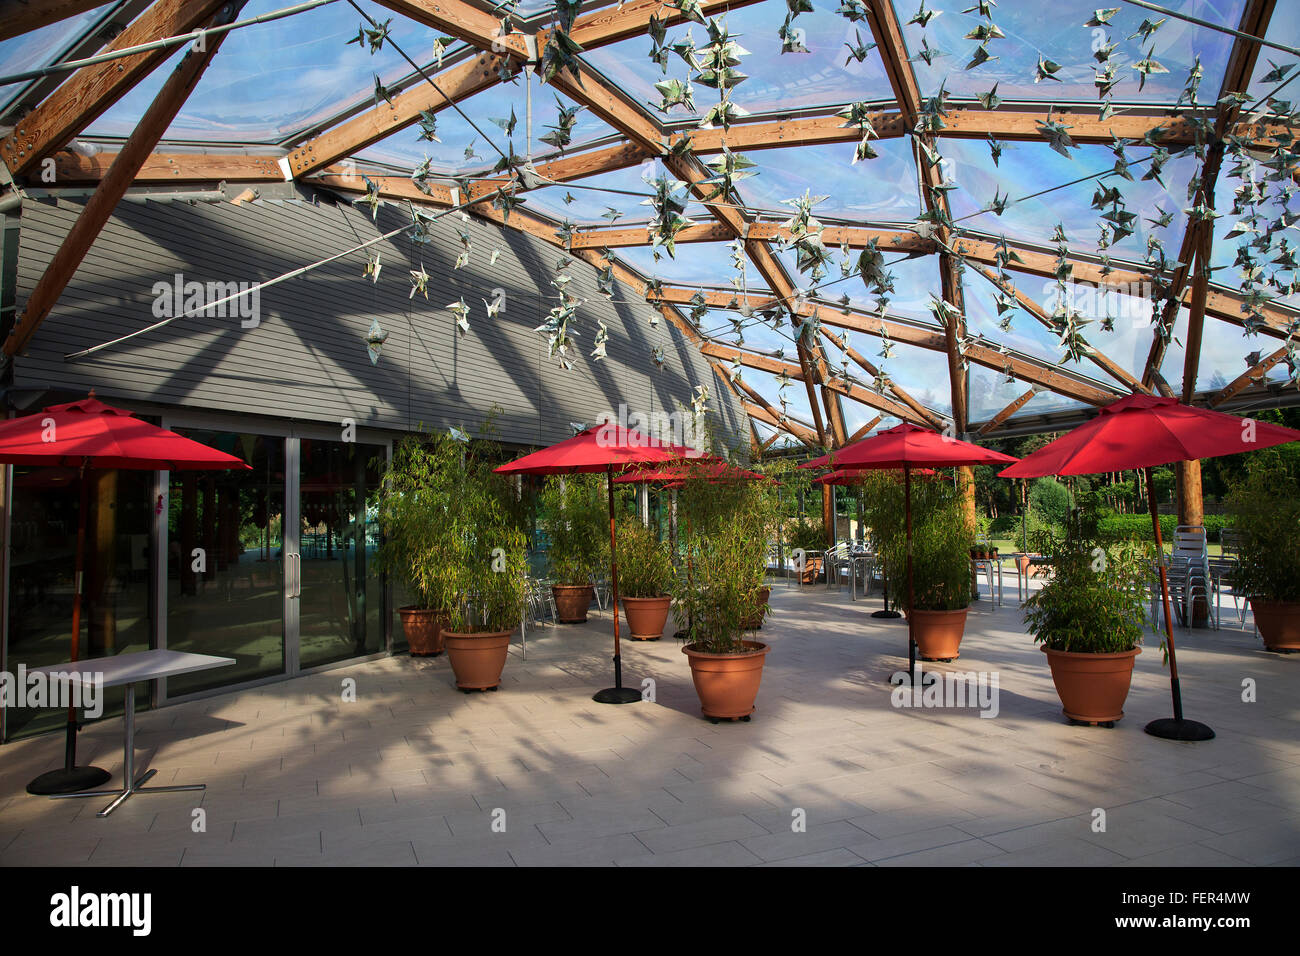 Alnwick Gardens cafe, Alnwick, Northumberland. UK Banque D'Images